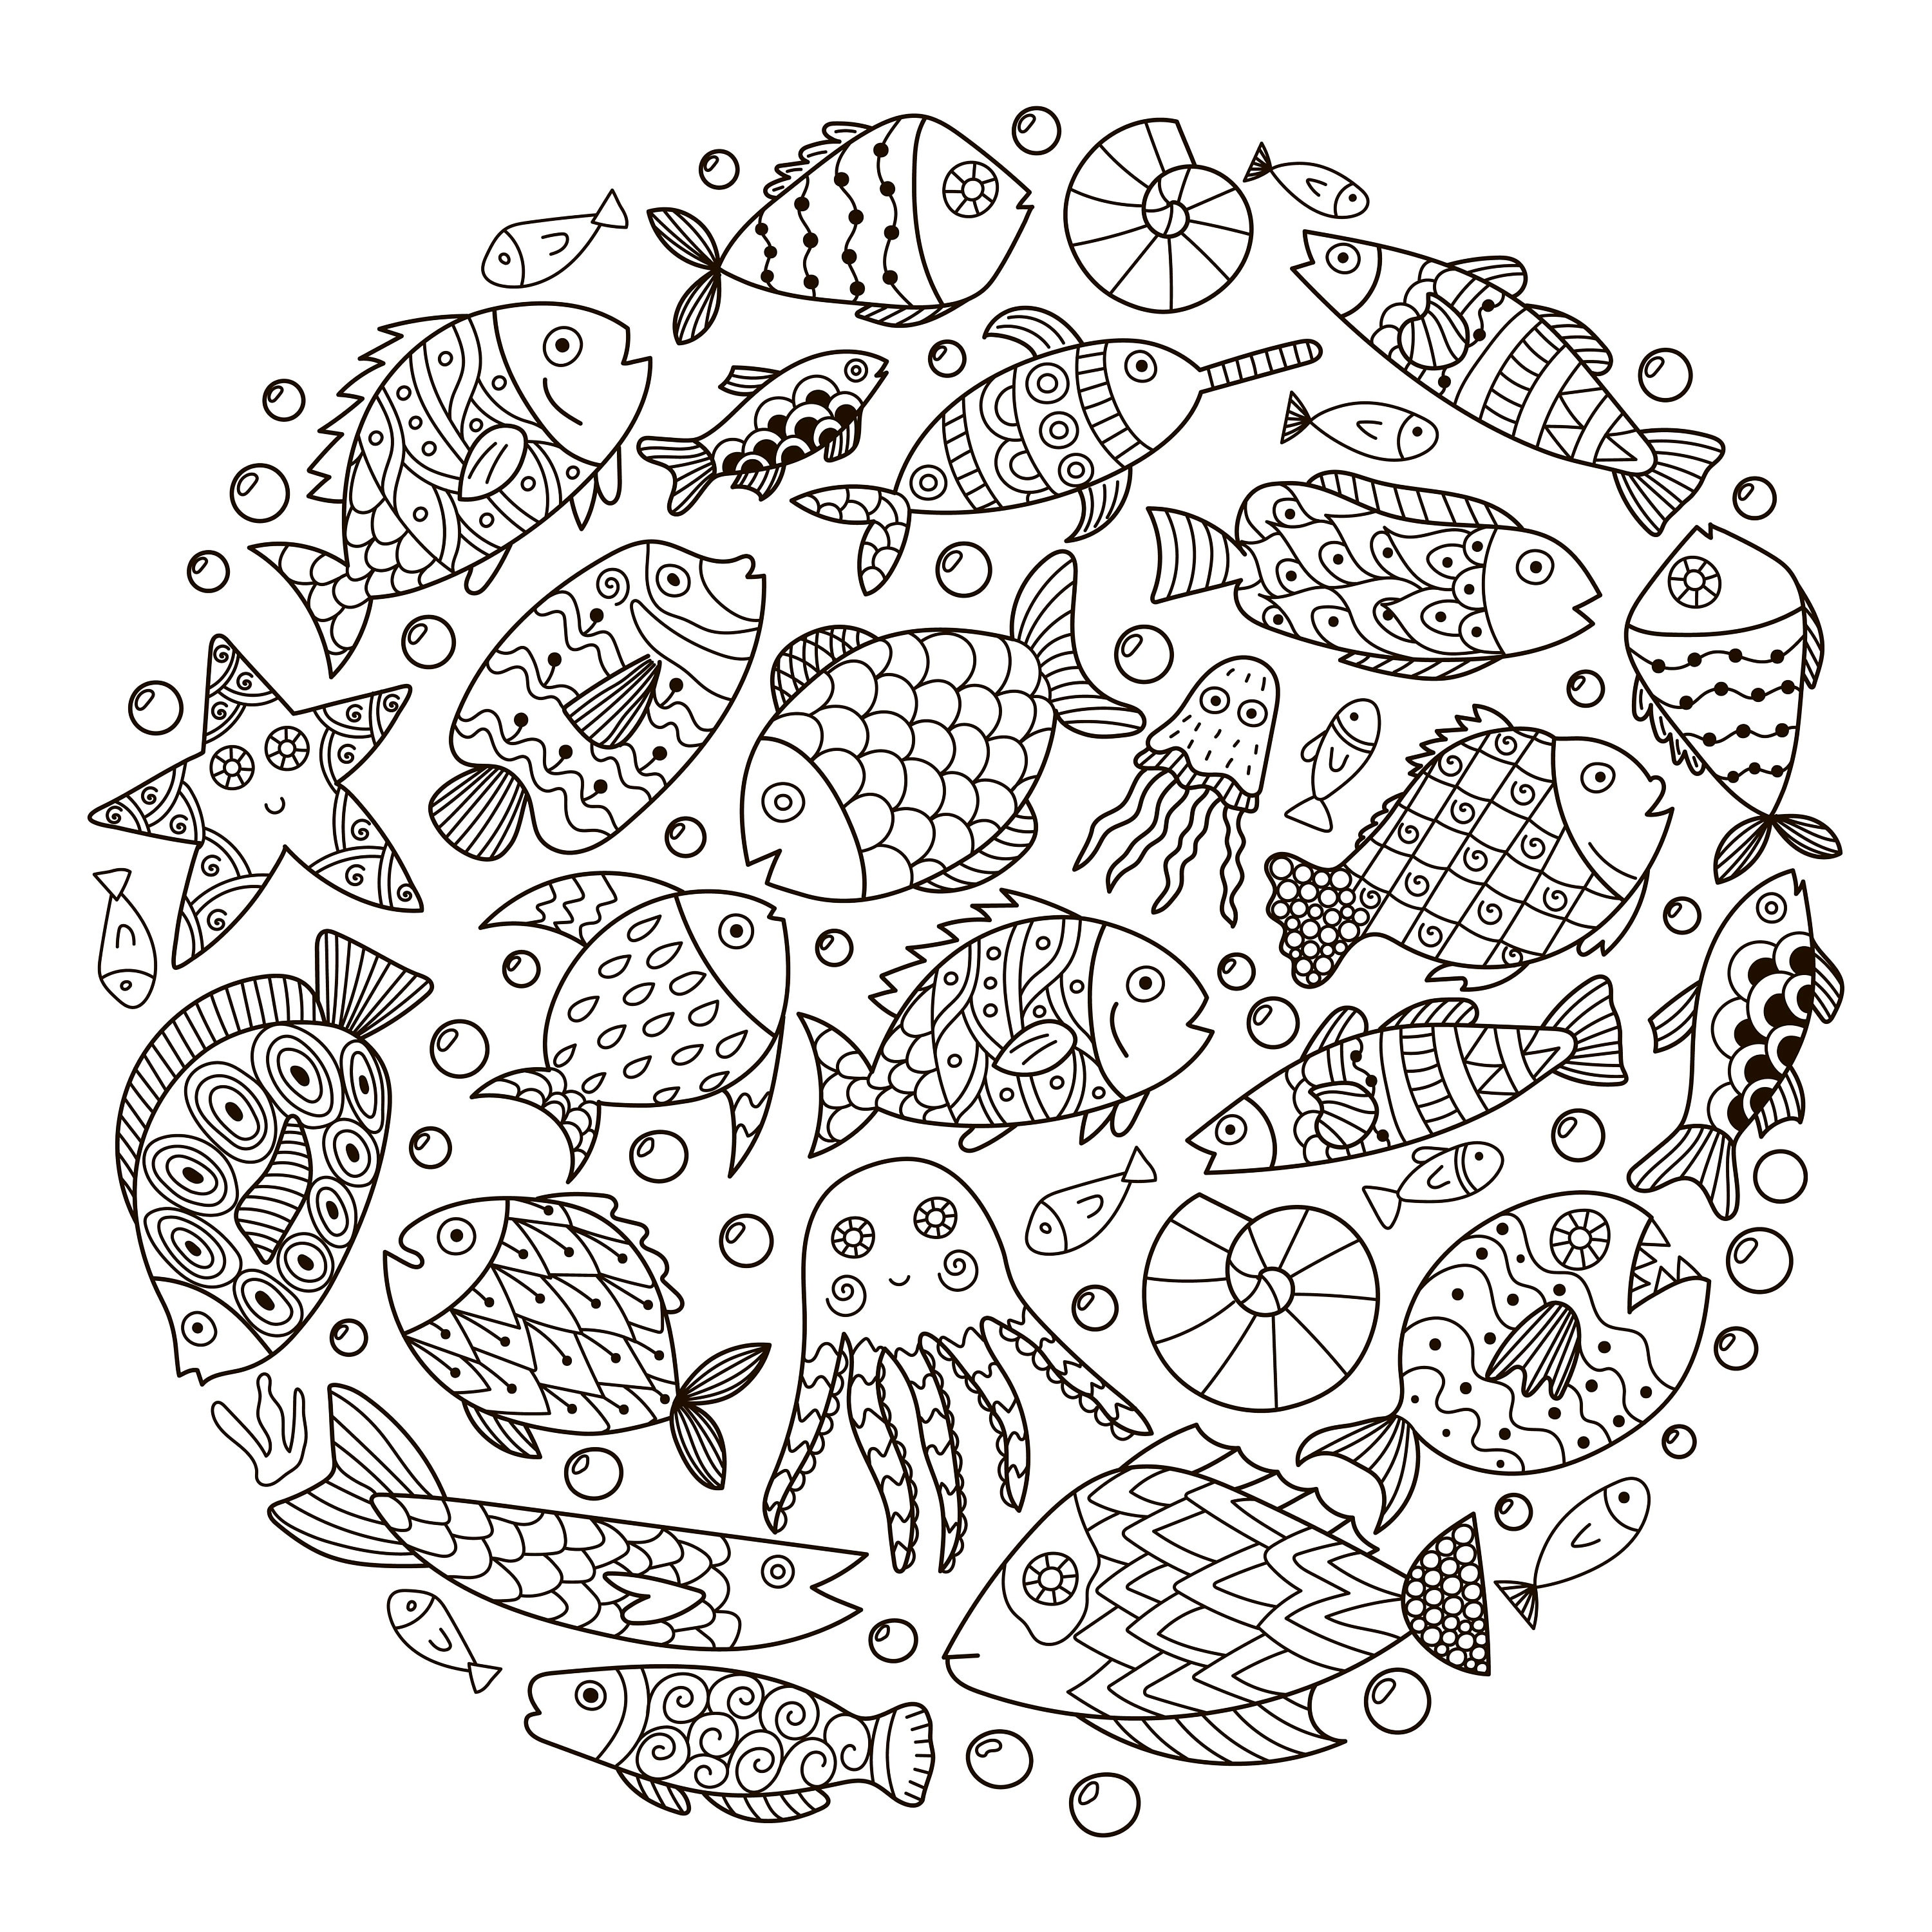 Coloring pages under the sea